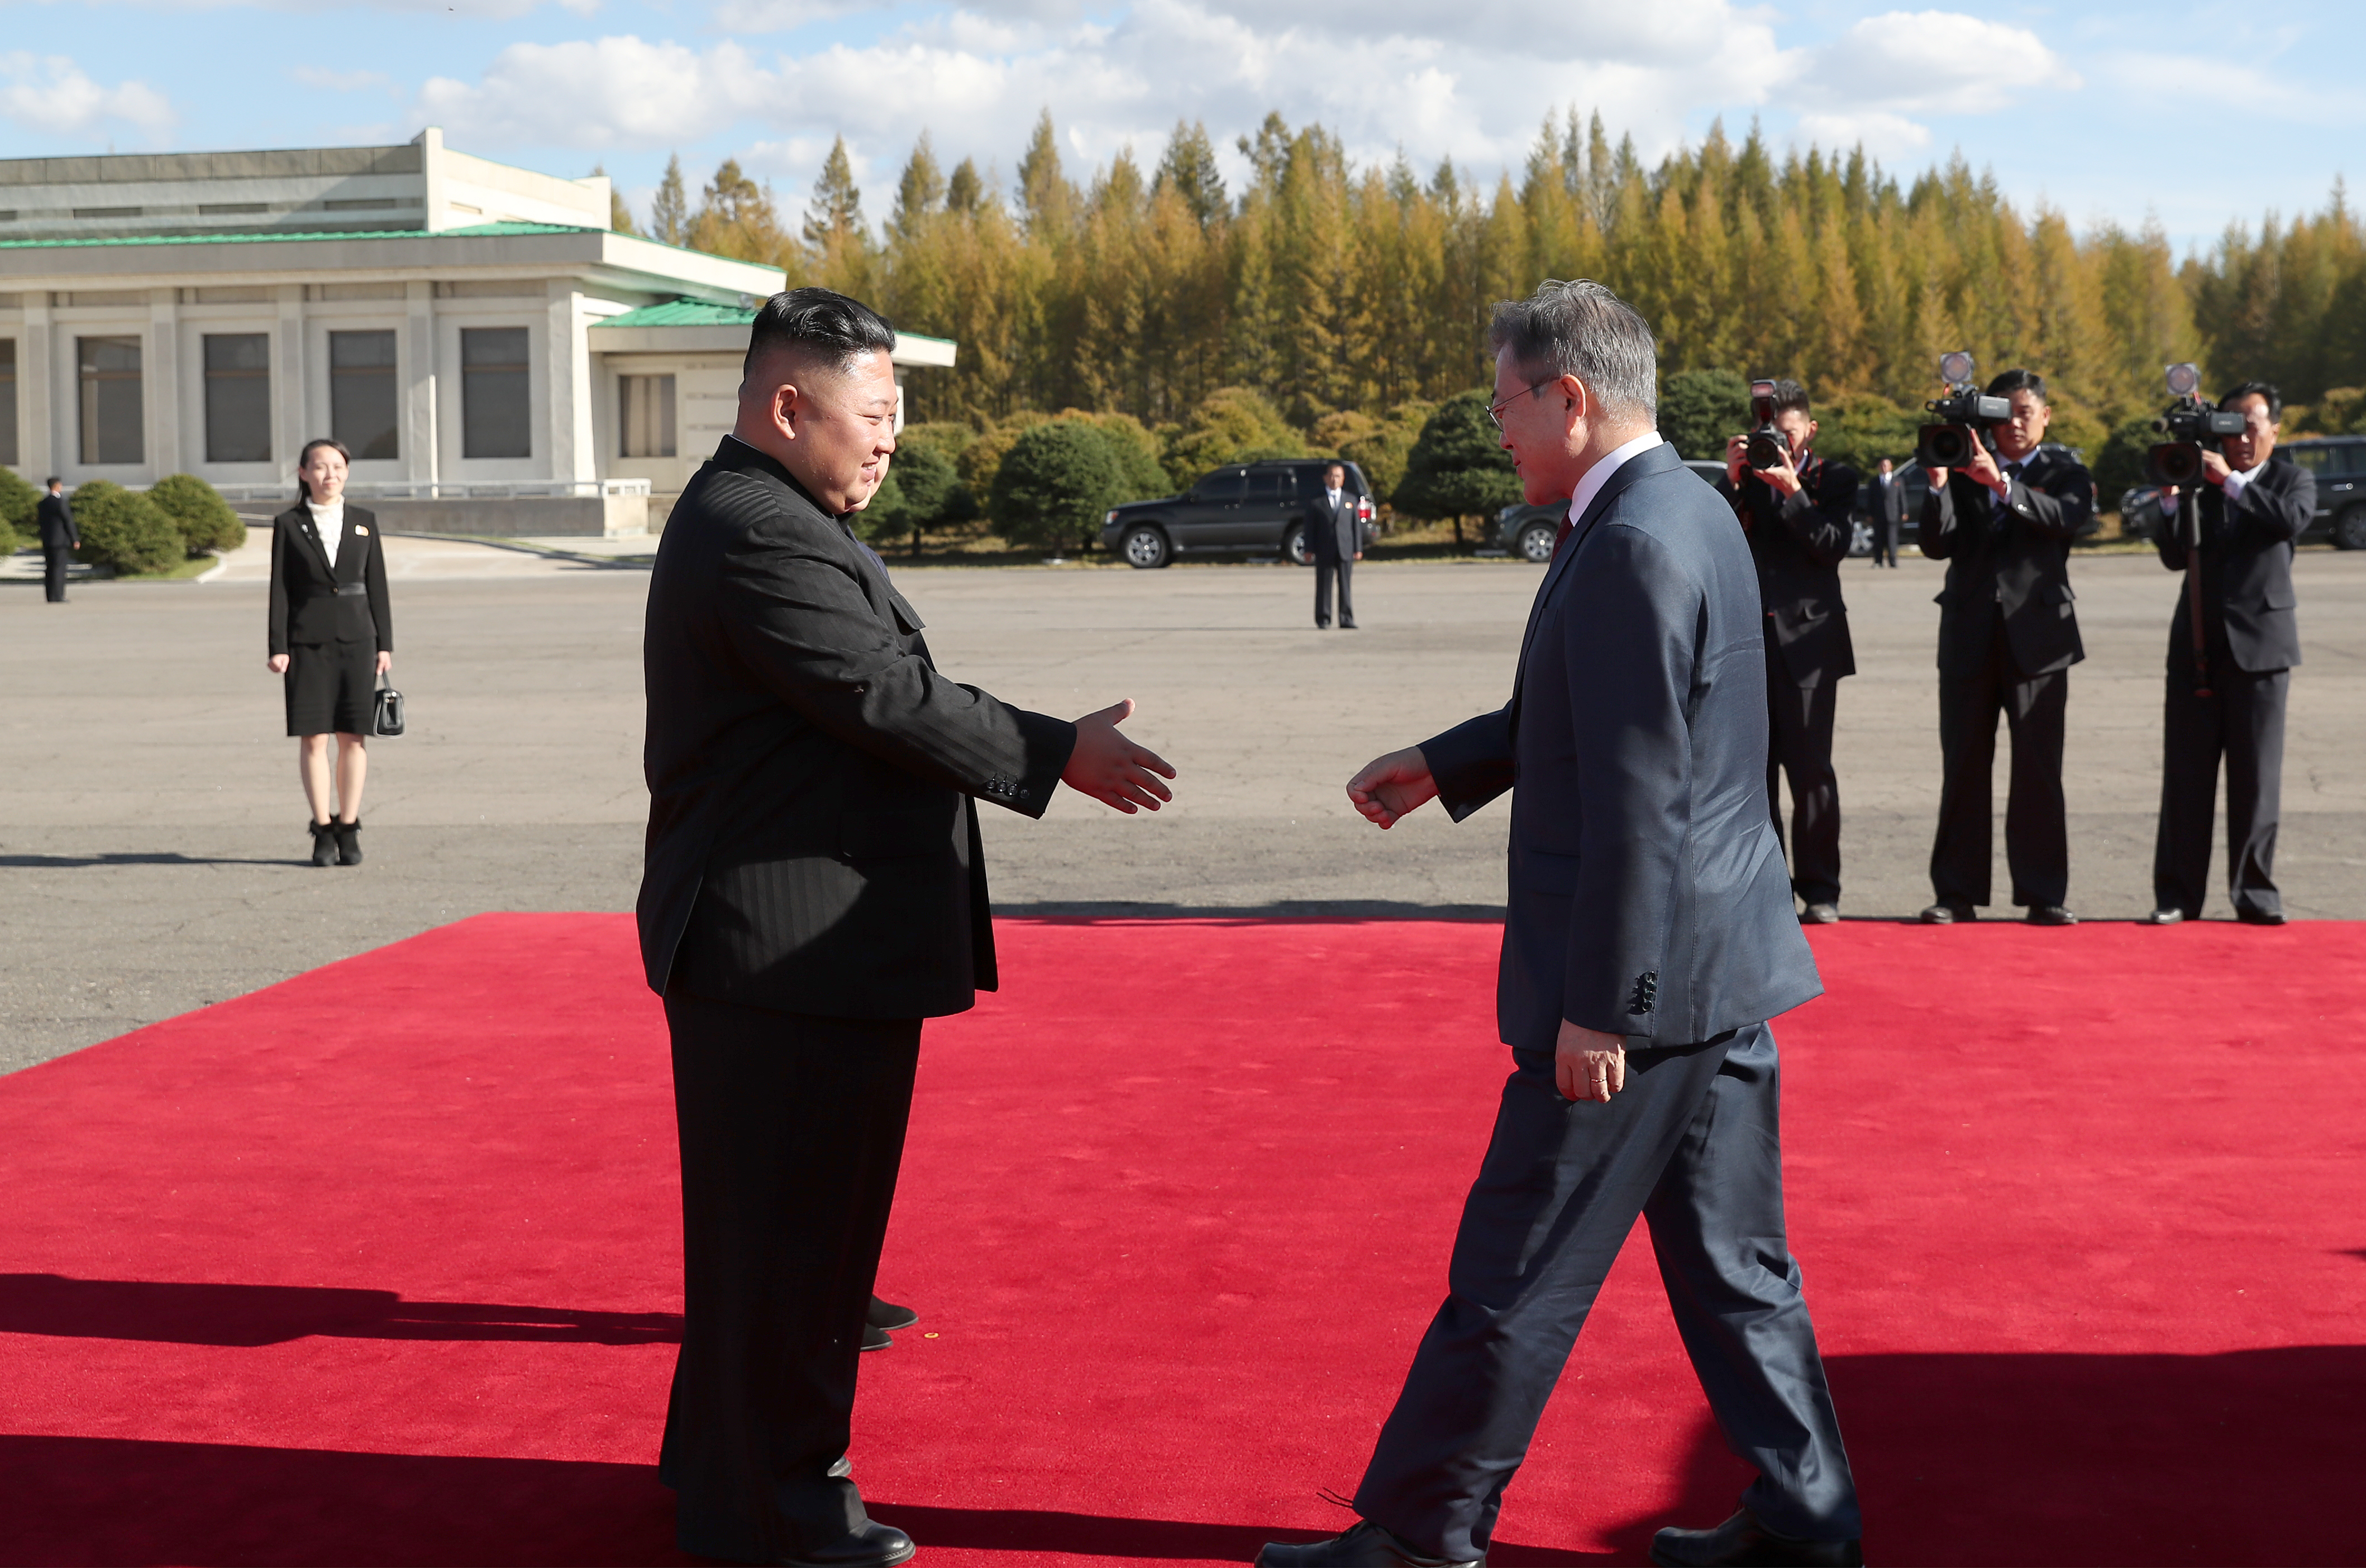 SAMJIYON, NORTH KOREA - SEPTEMBER 20: (EDITORIAL USE ONLY, NO COMMERCIAL USE) North Korea's leader Kim Jong Un (L) bids farewell to South Korean President Moon Jae-in (R) on Moon's departure from North Korea at Samjiyon airport on September 20, 2018 in Samjiyon, North Korea. (Pyeongyang Press Corps/Pool/Getty Images)